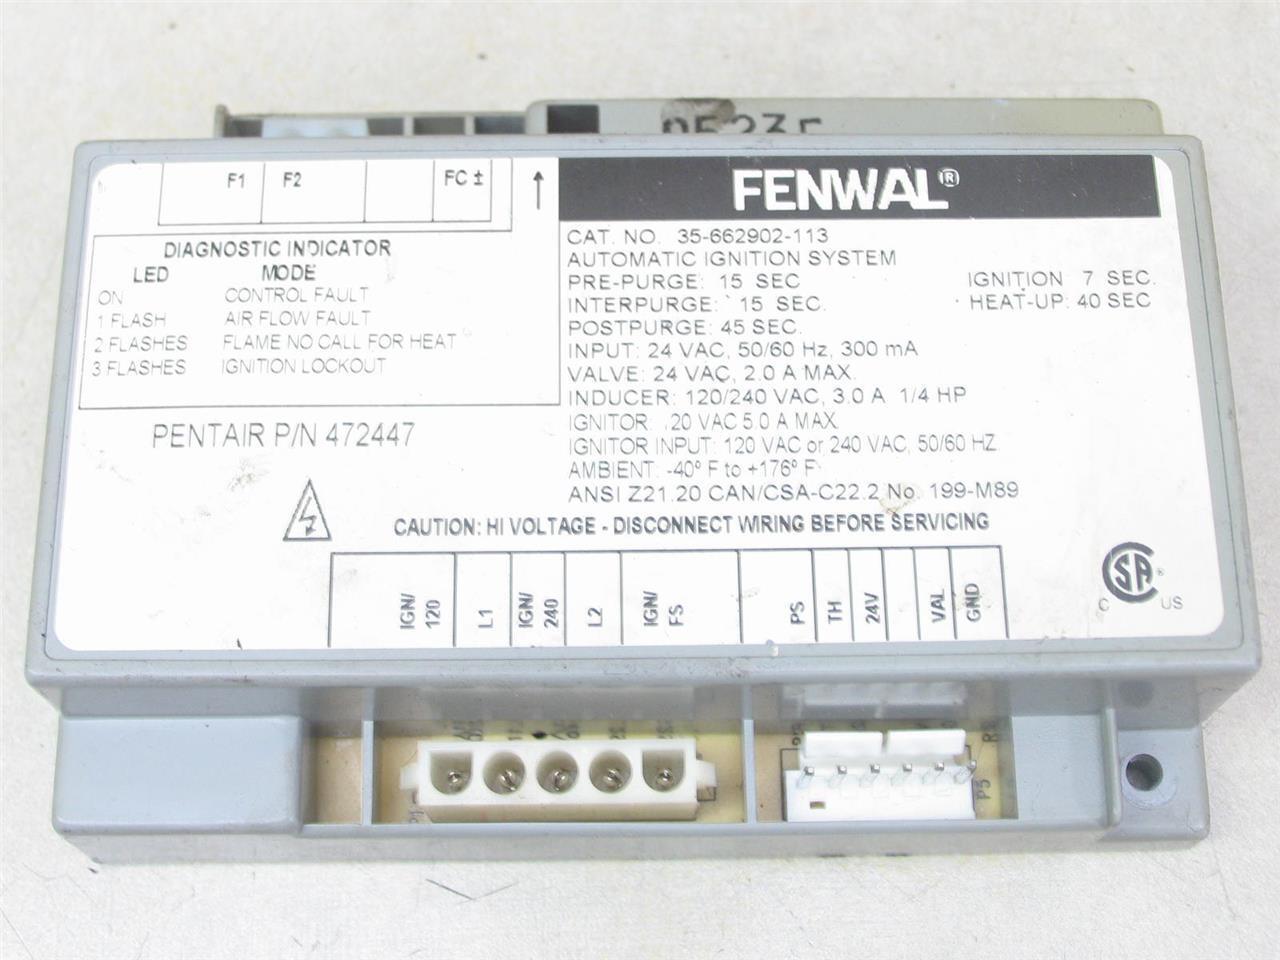 FENWAL 35-662902-113 Automatic Ignition System Pentair 472447